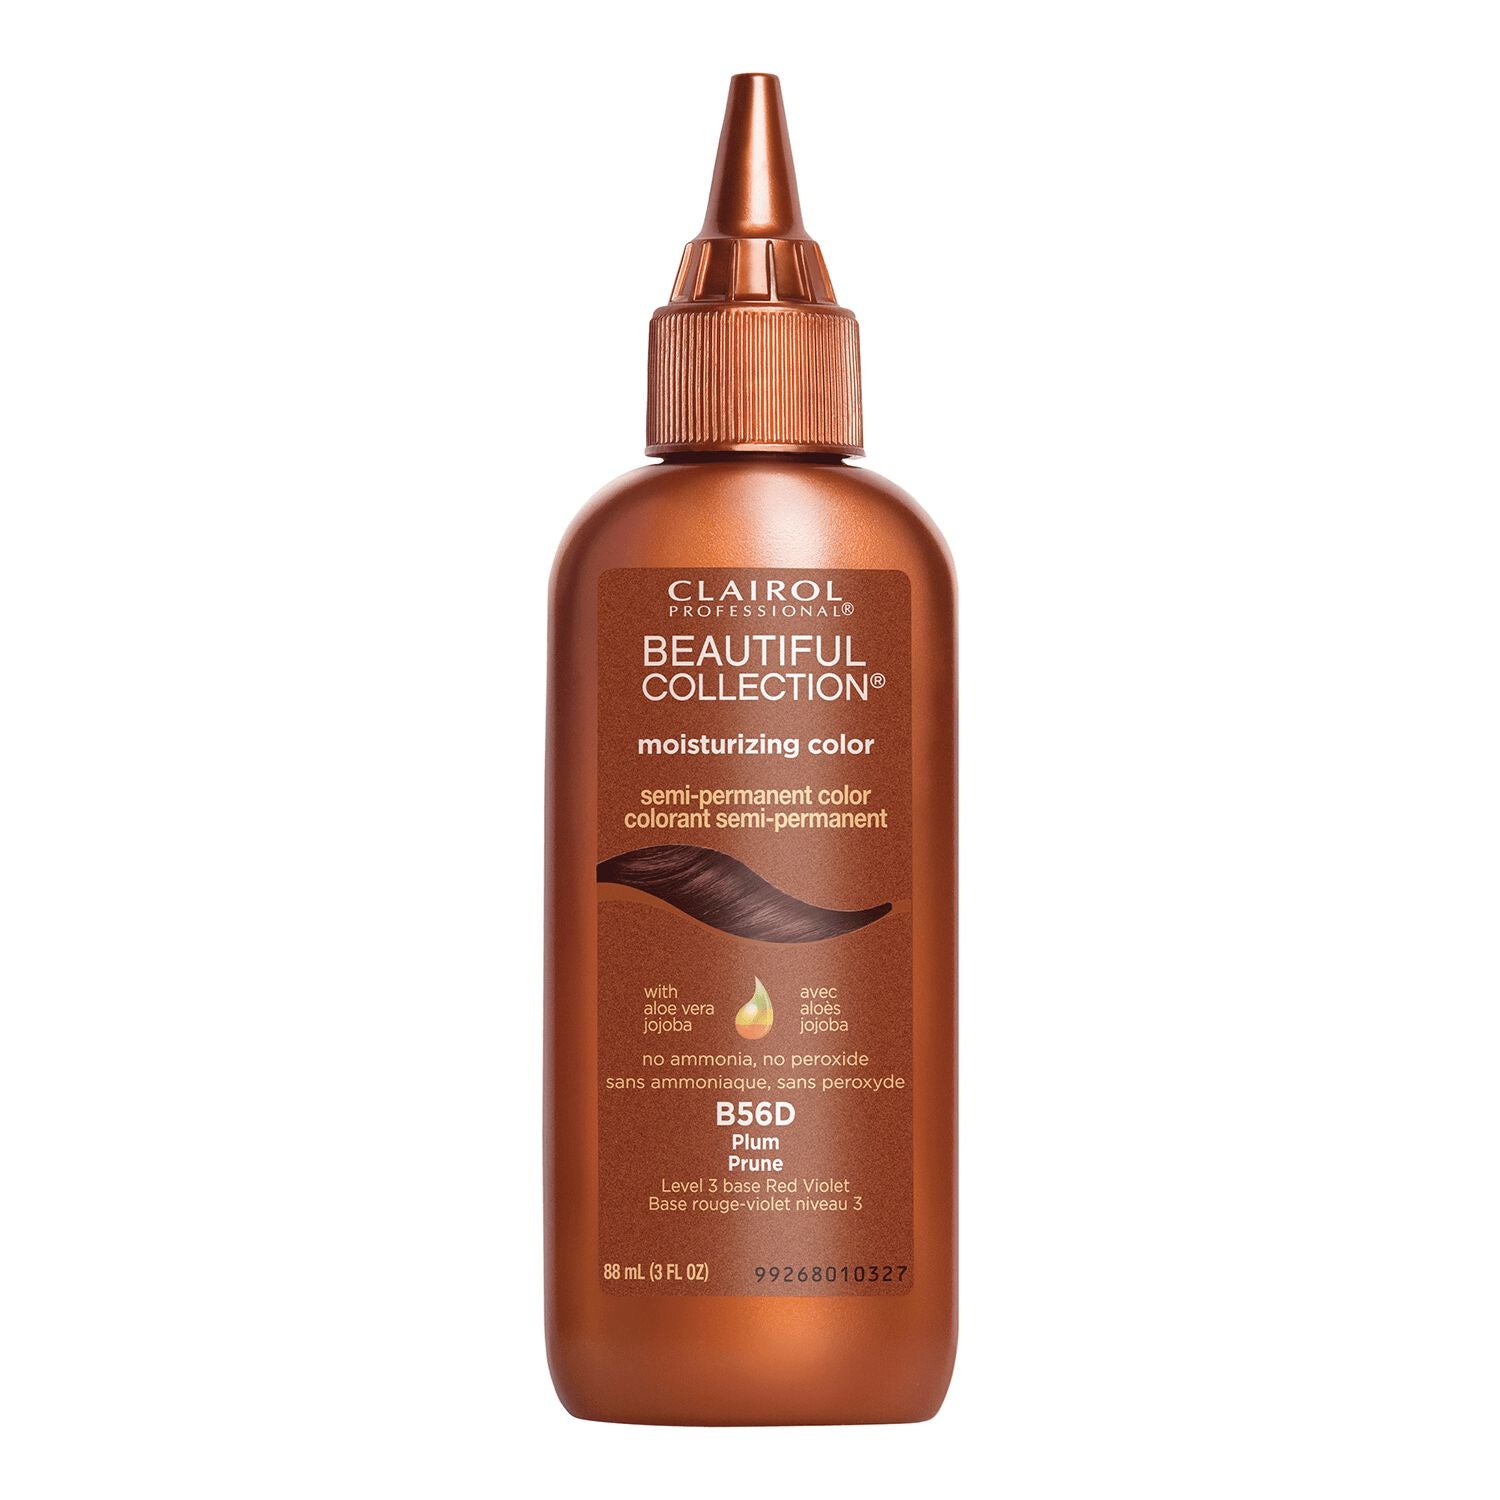 CLAIROL PROFESSIONAL BEAUTIFUL COLLECTION MOISTURIZING COLOR